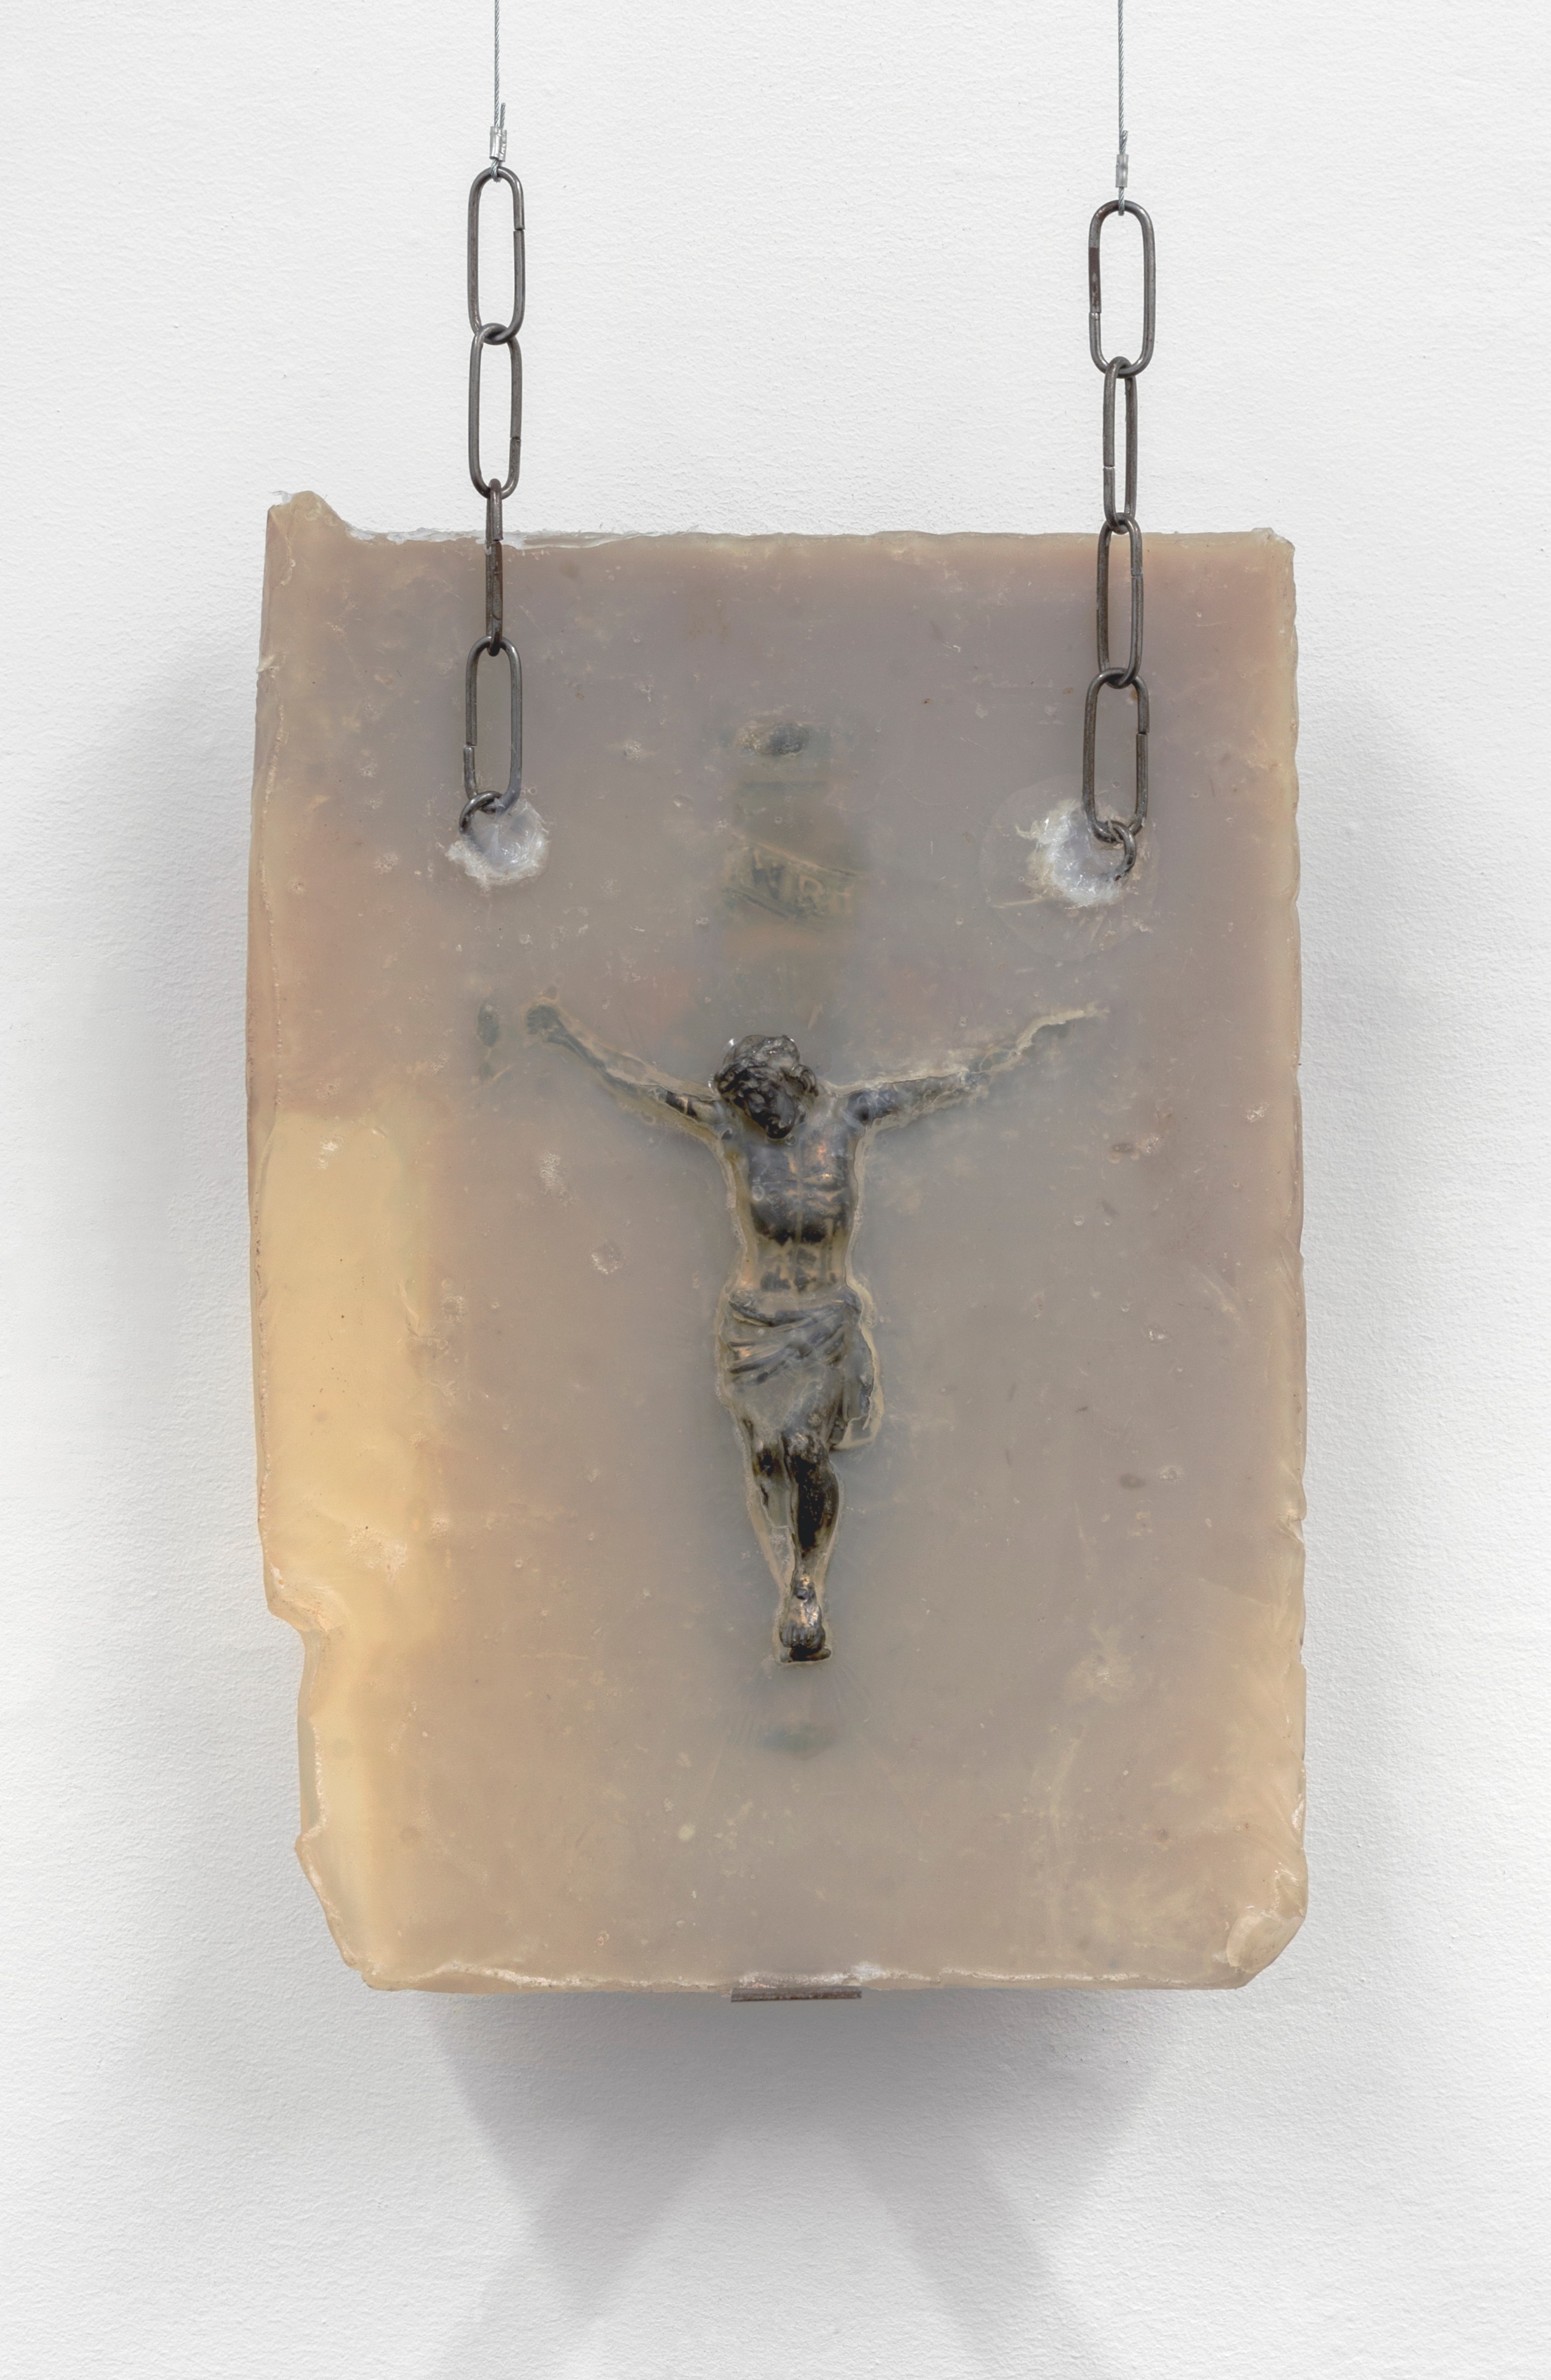 For the love of (2020)
Soap, wax, crucifix, silicone. 

22.5h x 13.25w x 8d in (57.5h x 33.7w x 20.3d cm)